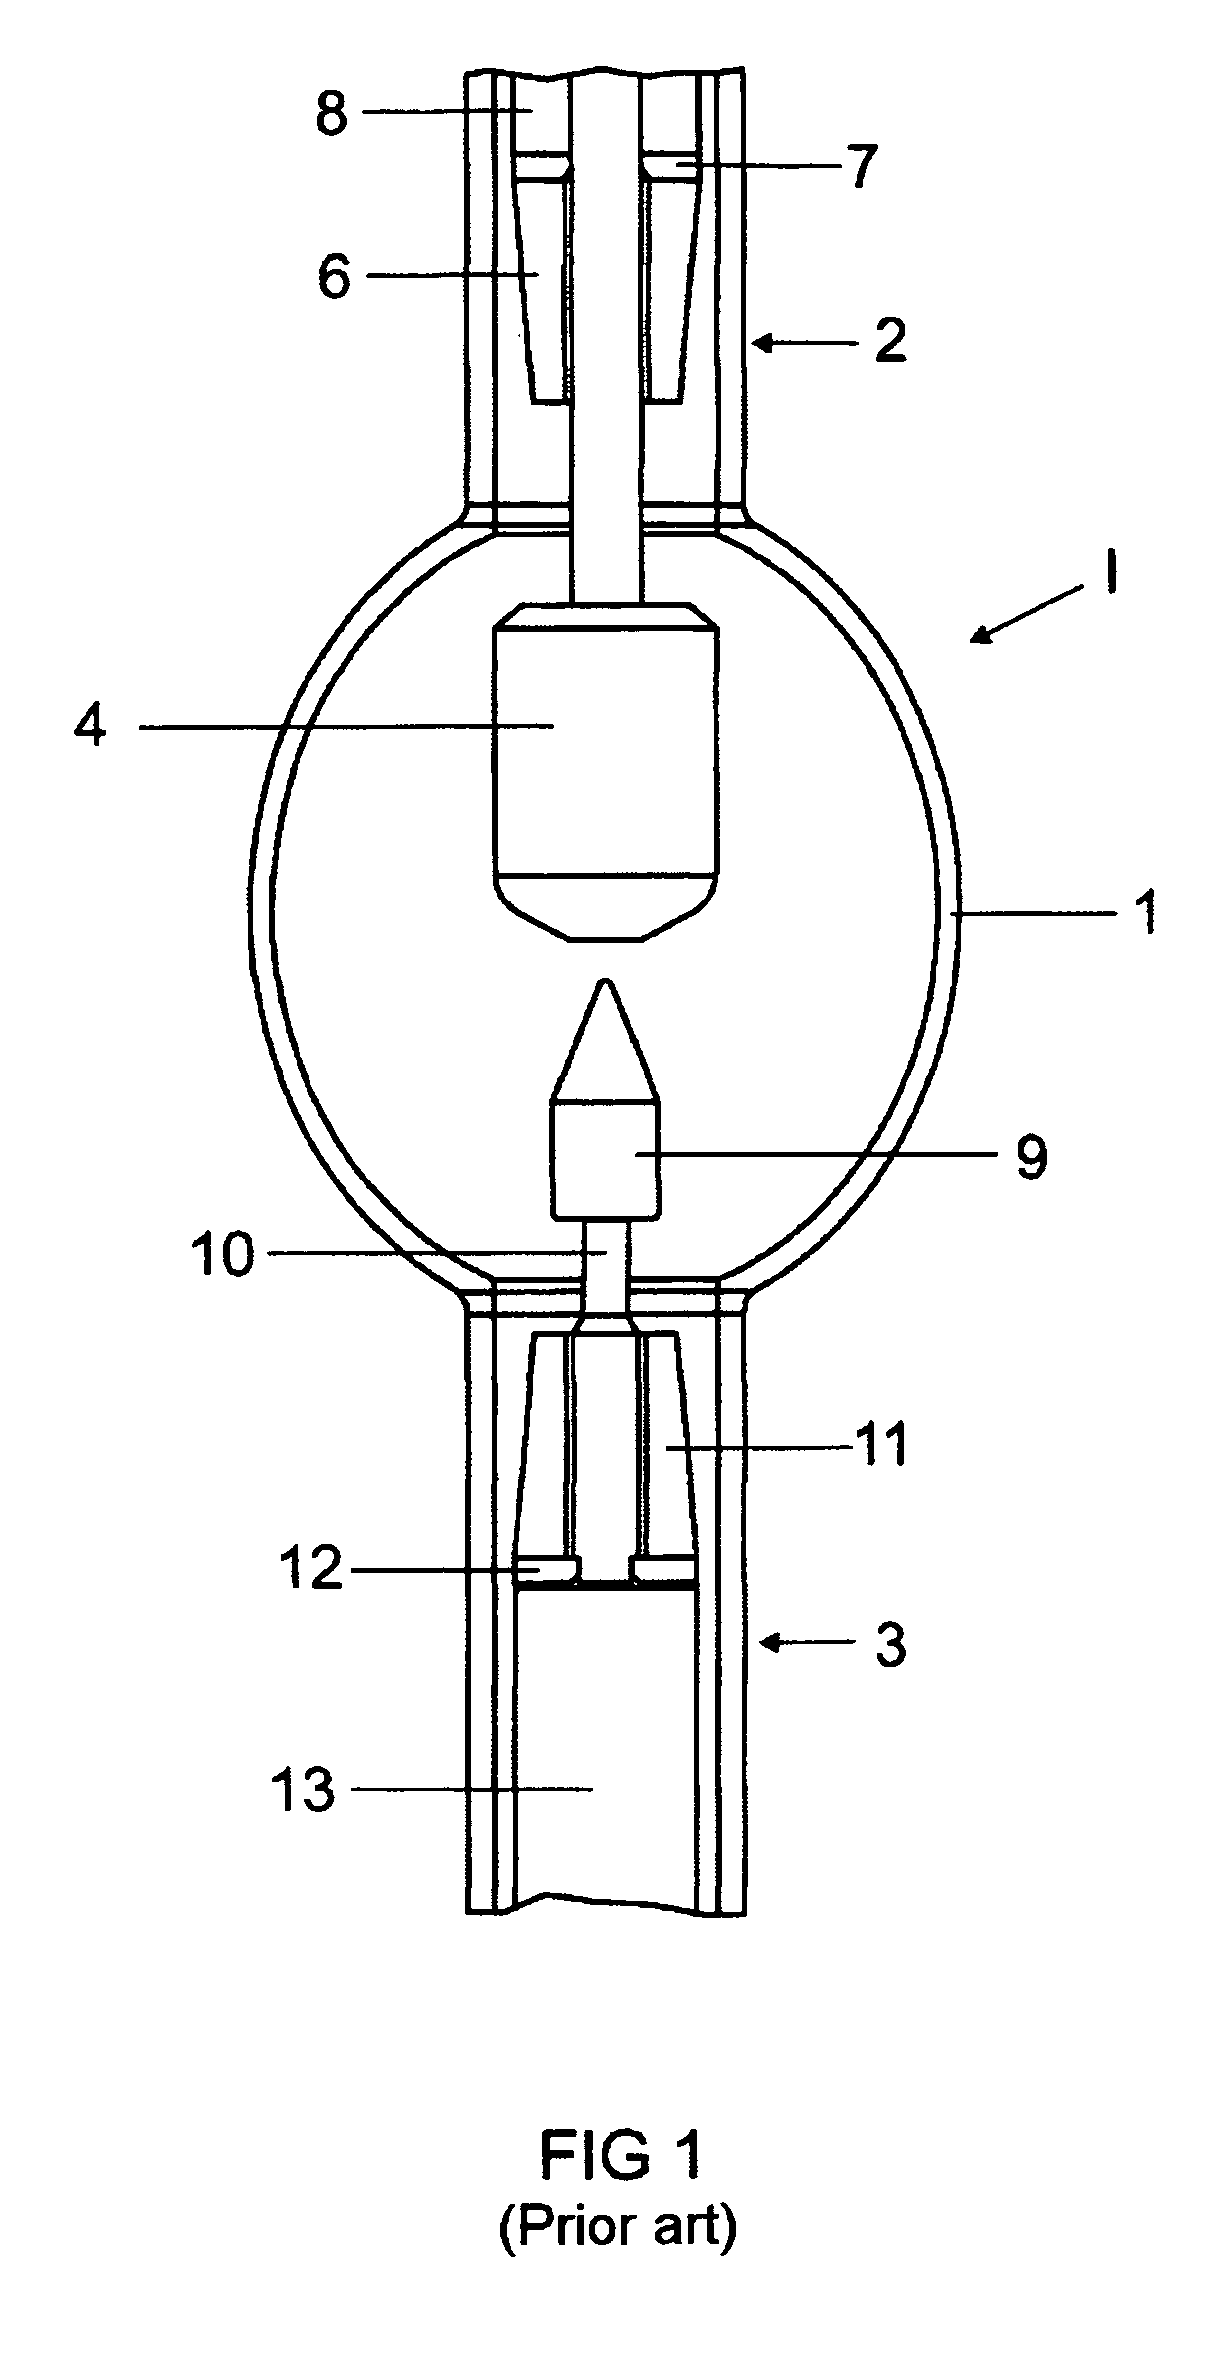 Discharge lamp with a holding apparatus for the electrodes